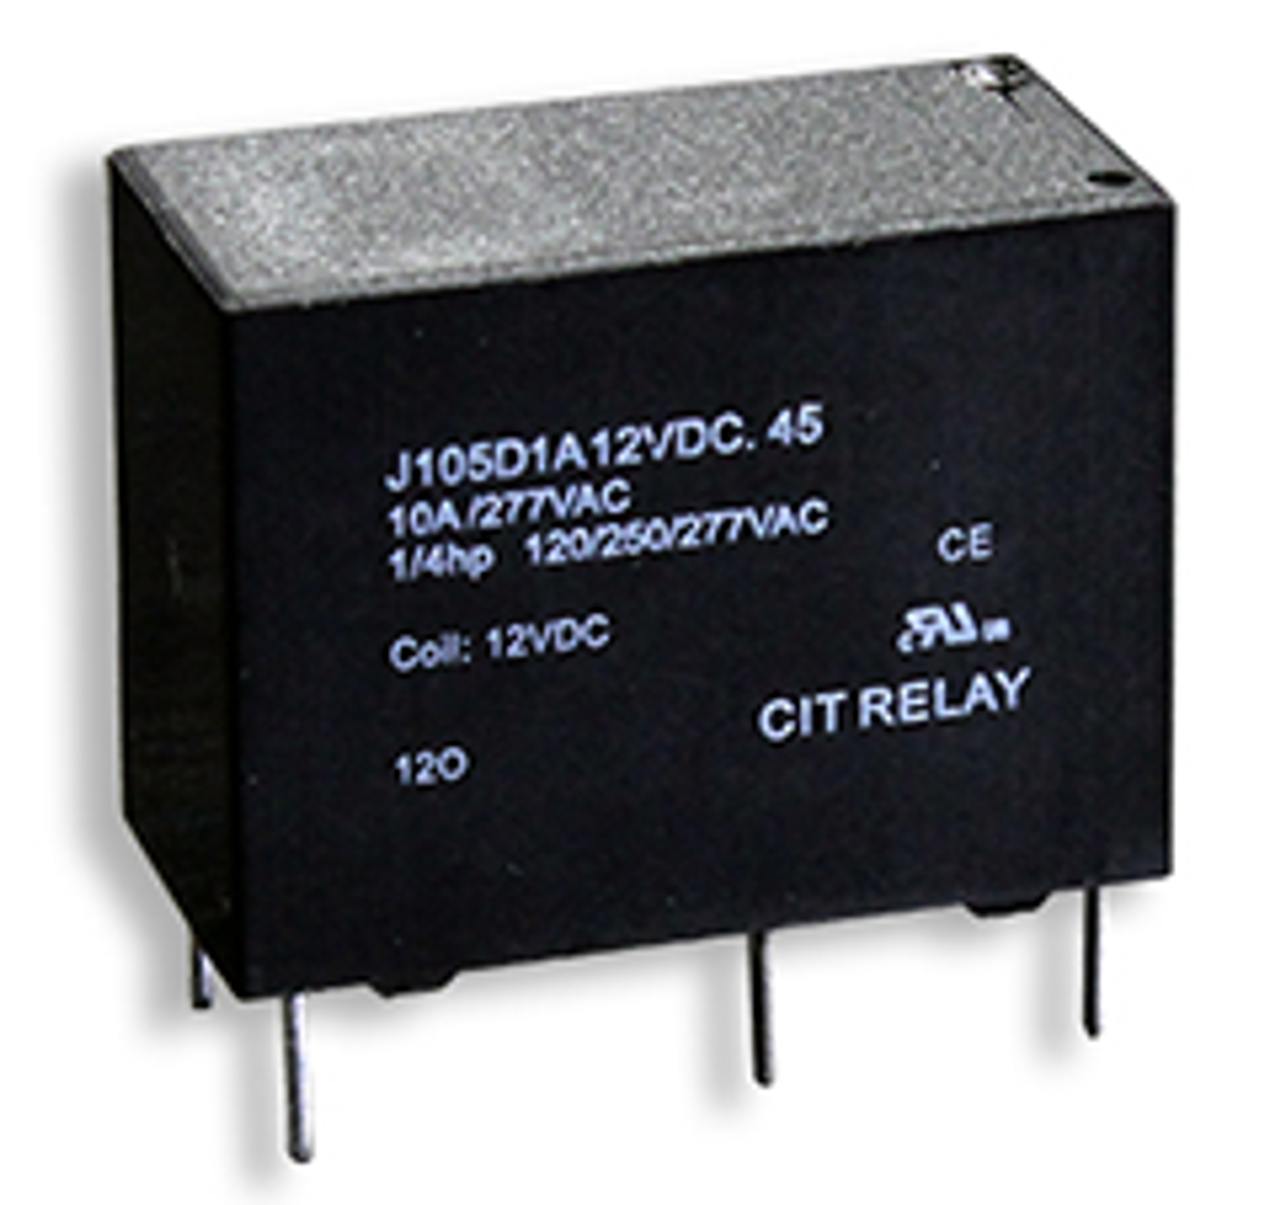 CIT Relay and Switch J105D1AS48VDC.45 Power Relays